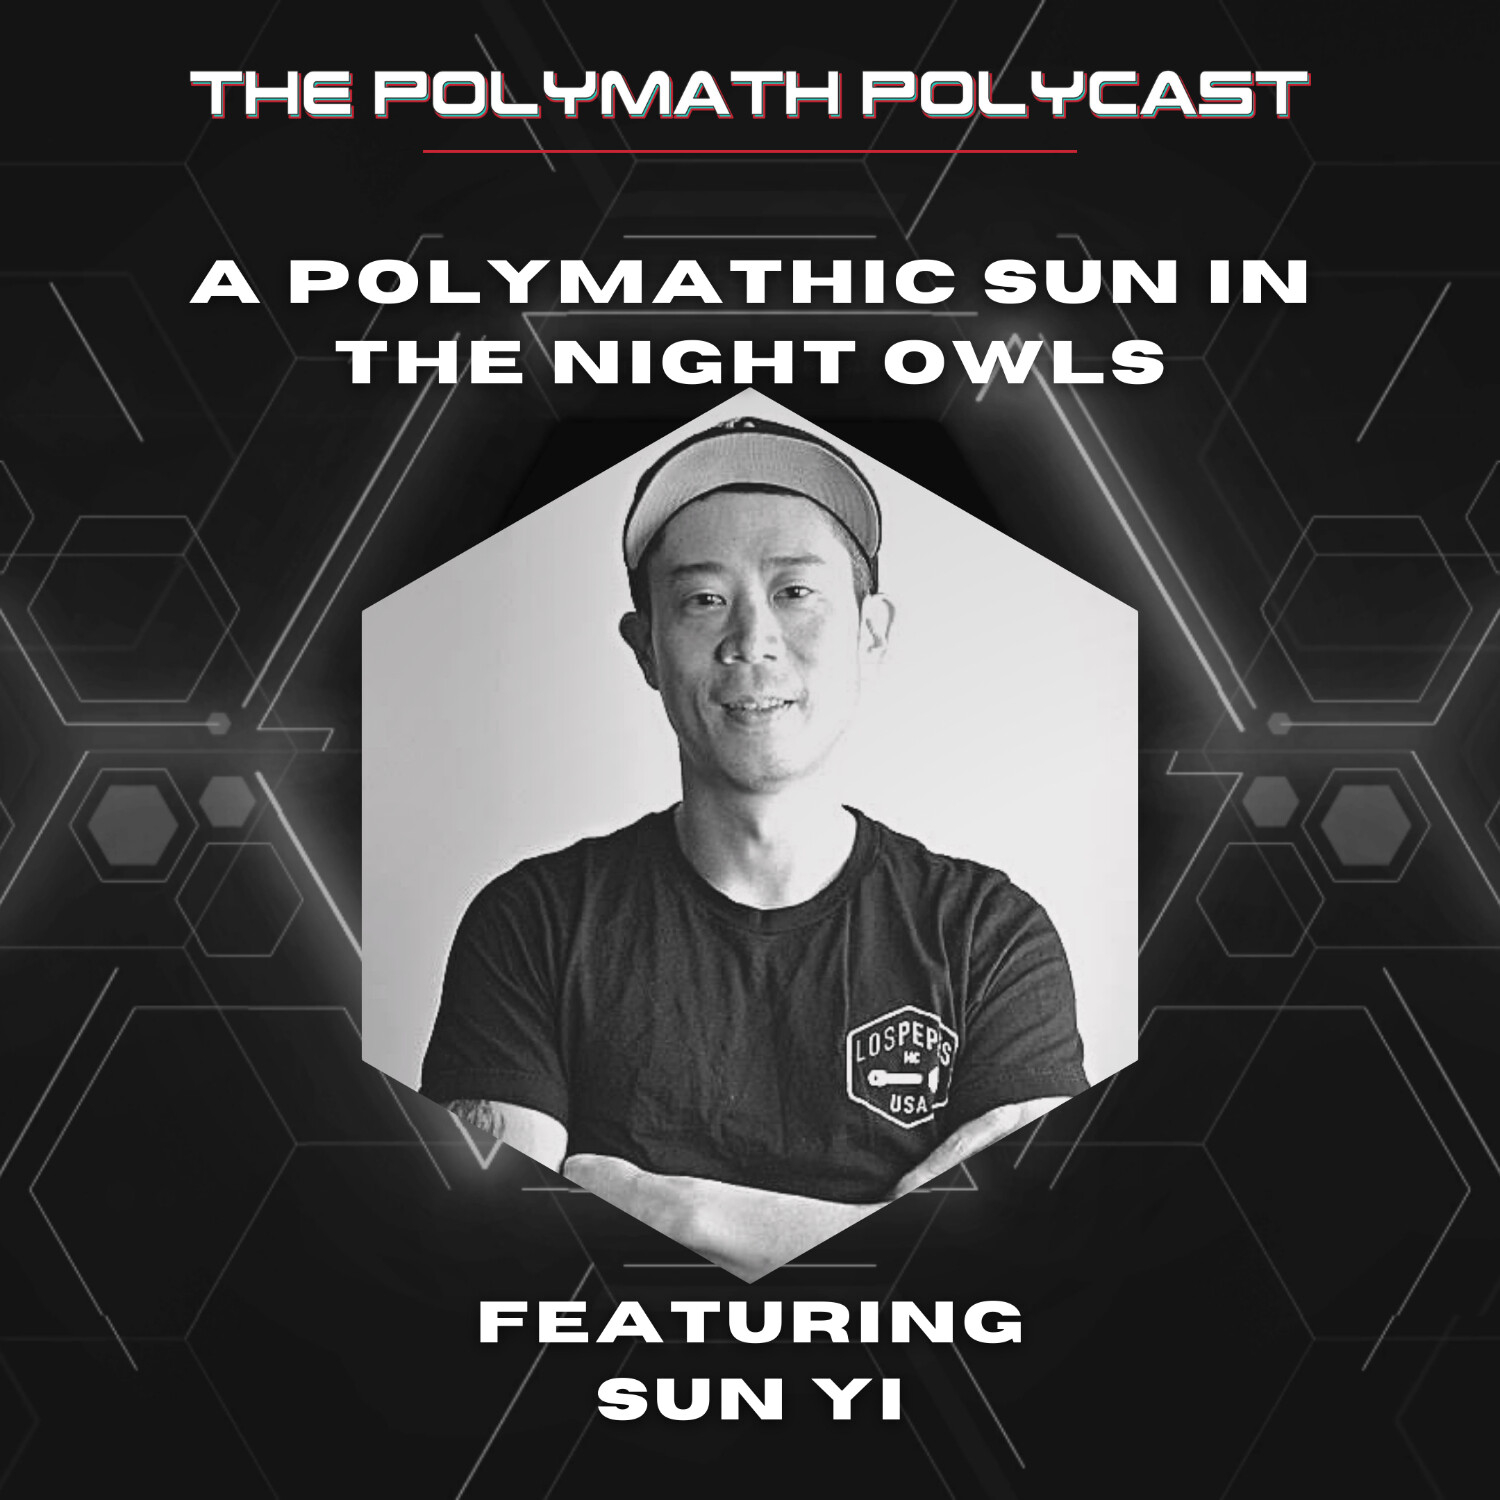 Learn Personal Branding with the Polymathic Sun Yi #ThePolymathPolyCast